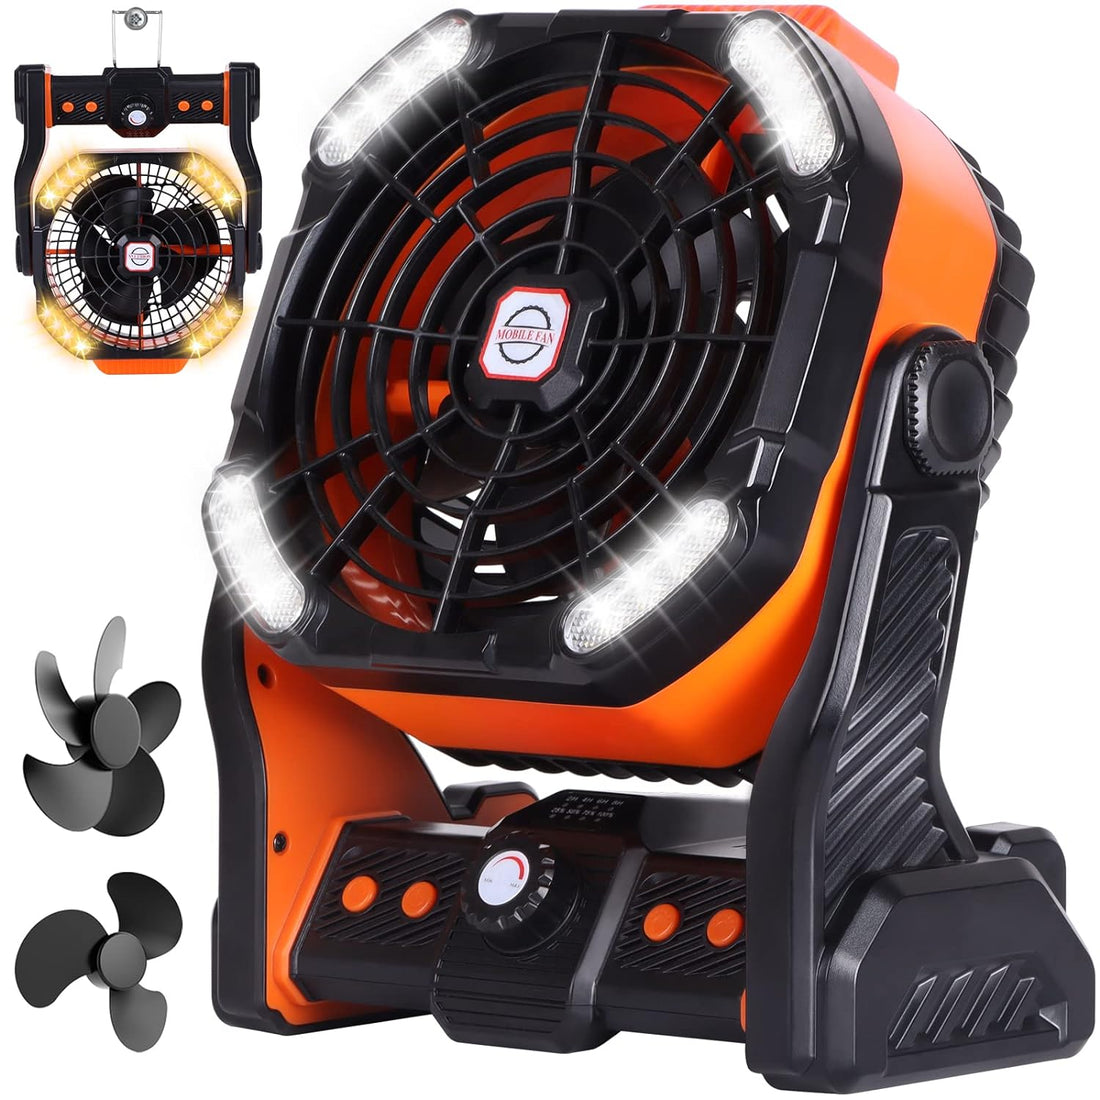 RUNTOP Battery Operated Fan, Camping Fan with 2 Colors LED Lantern, 2 Blades, Timer, 8 Inch Rechargeable Fan with Hook for Tent Car Travel Jobsite Fishing Outdoor Hurricane Power Outage